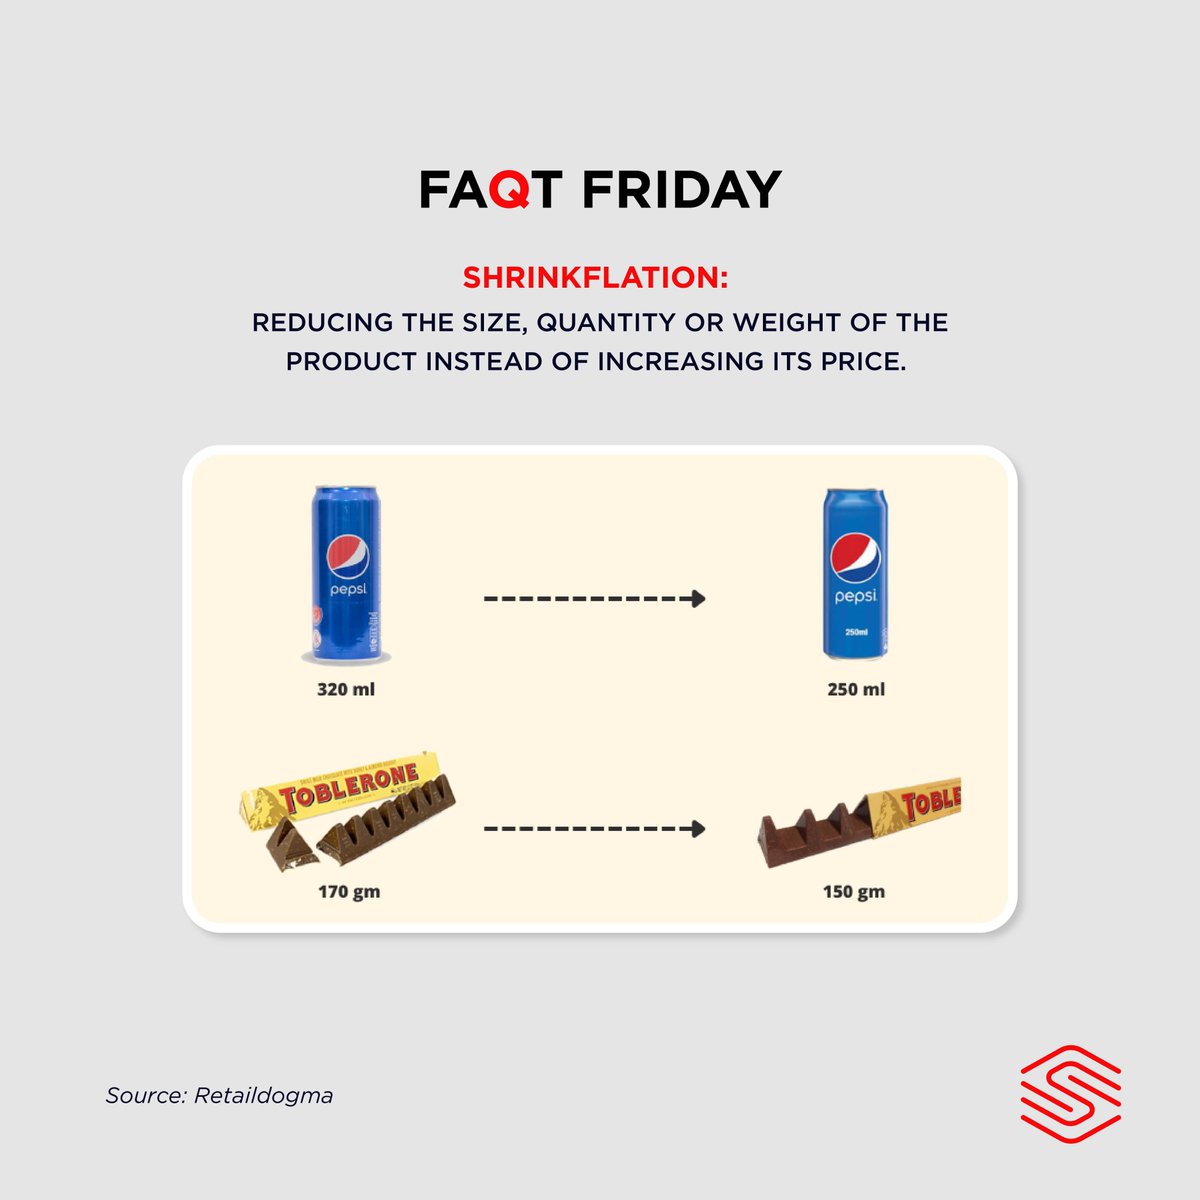 FAQT FRIDAY: #SHRINKFLATION ⬇️ We are all familiar with the impact of inflation on our wallets. This often causes a 'substitution effect,' where we look for similar products sold at lower prices. Experienced any “shrinkflation” effects with your favourite brands? #Shrinkflation